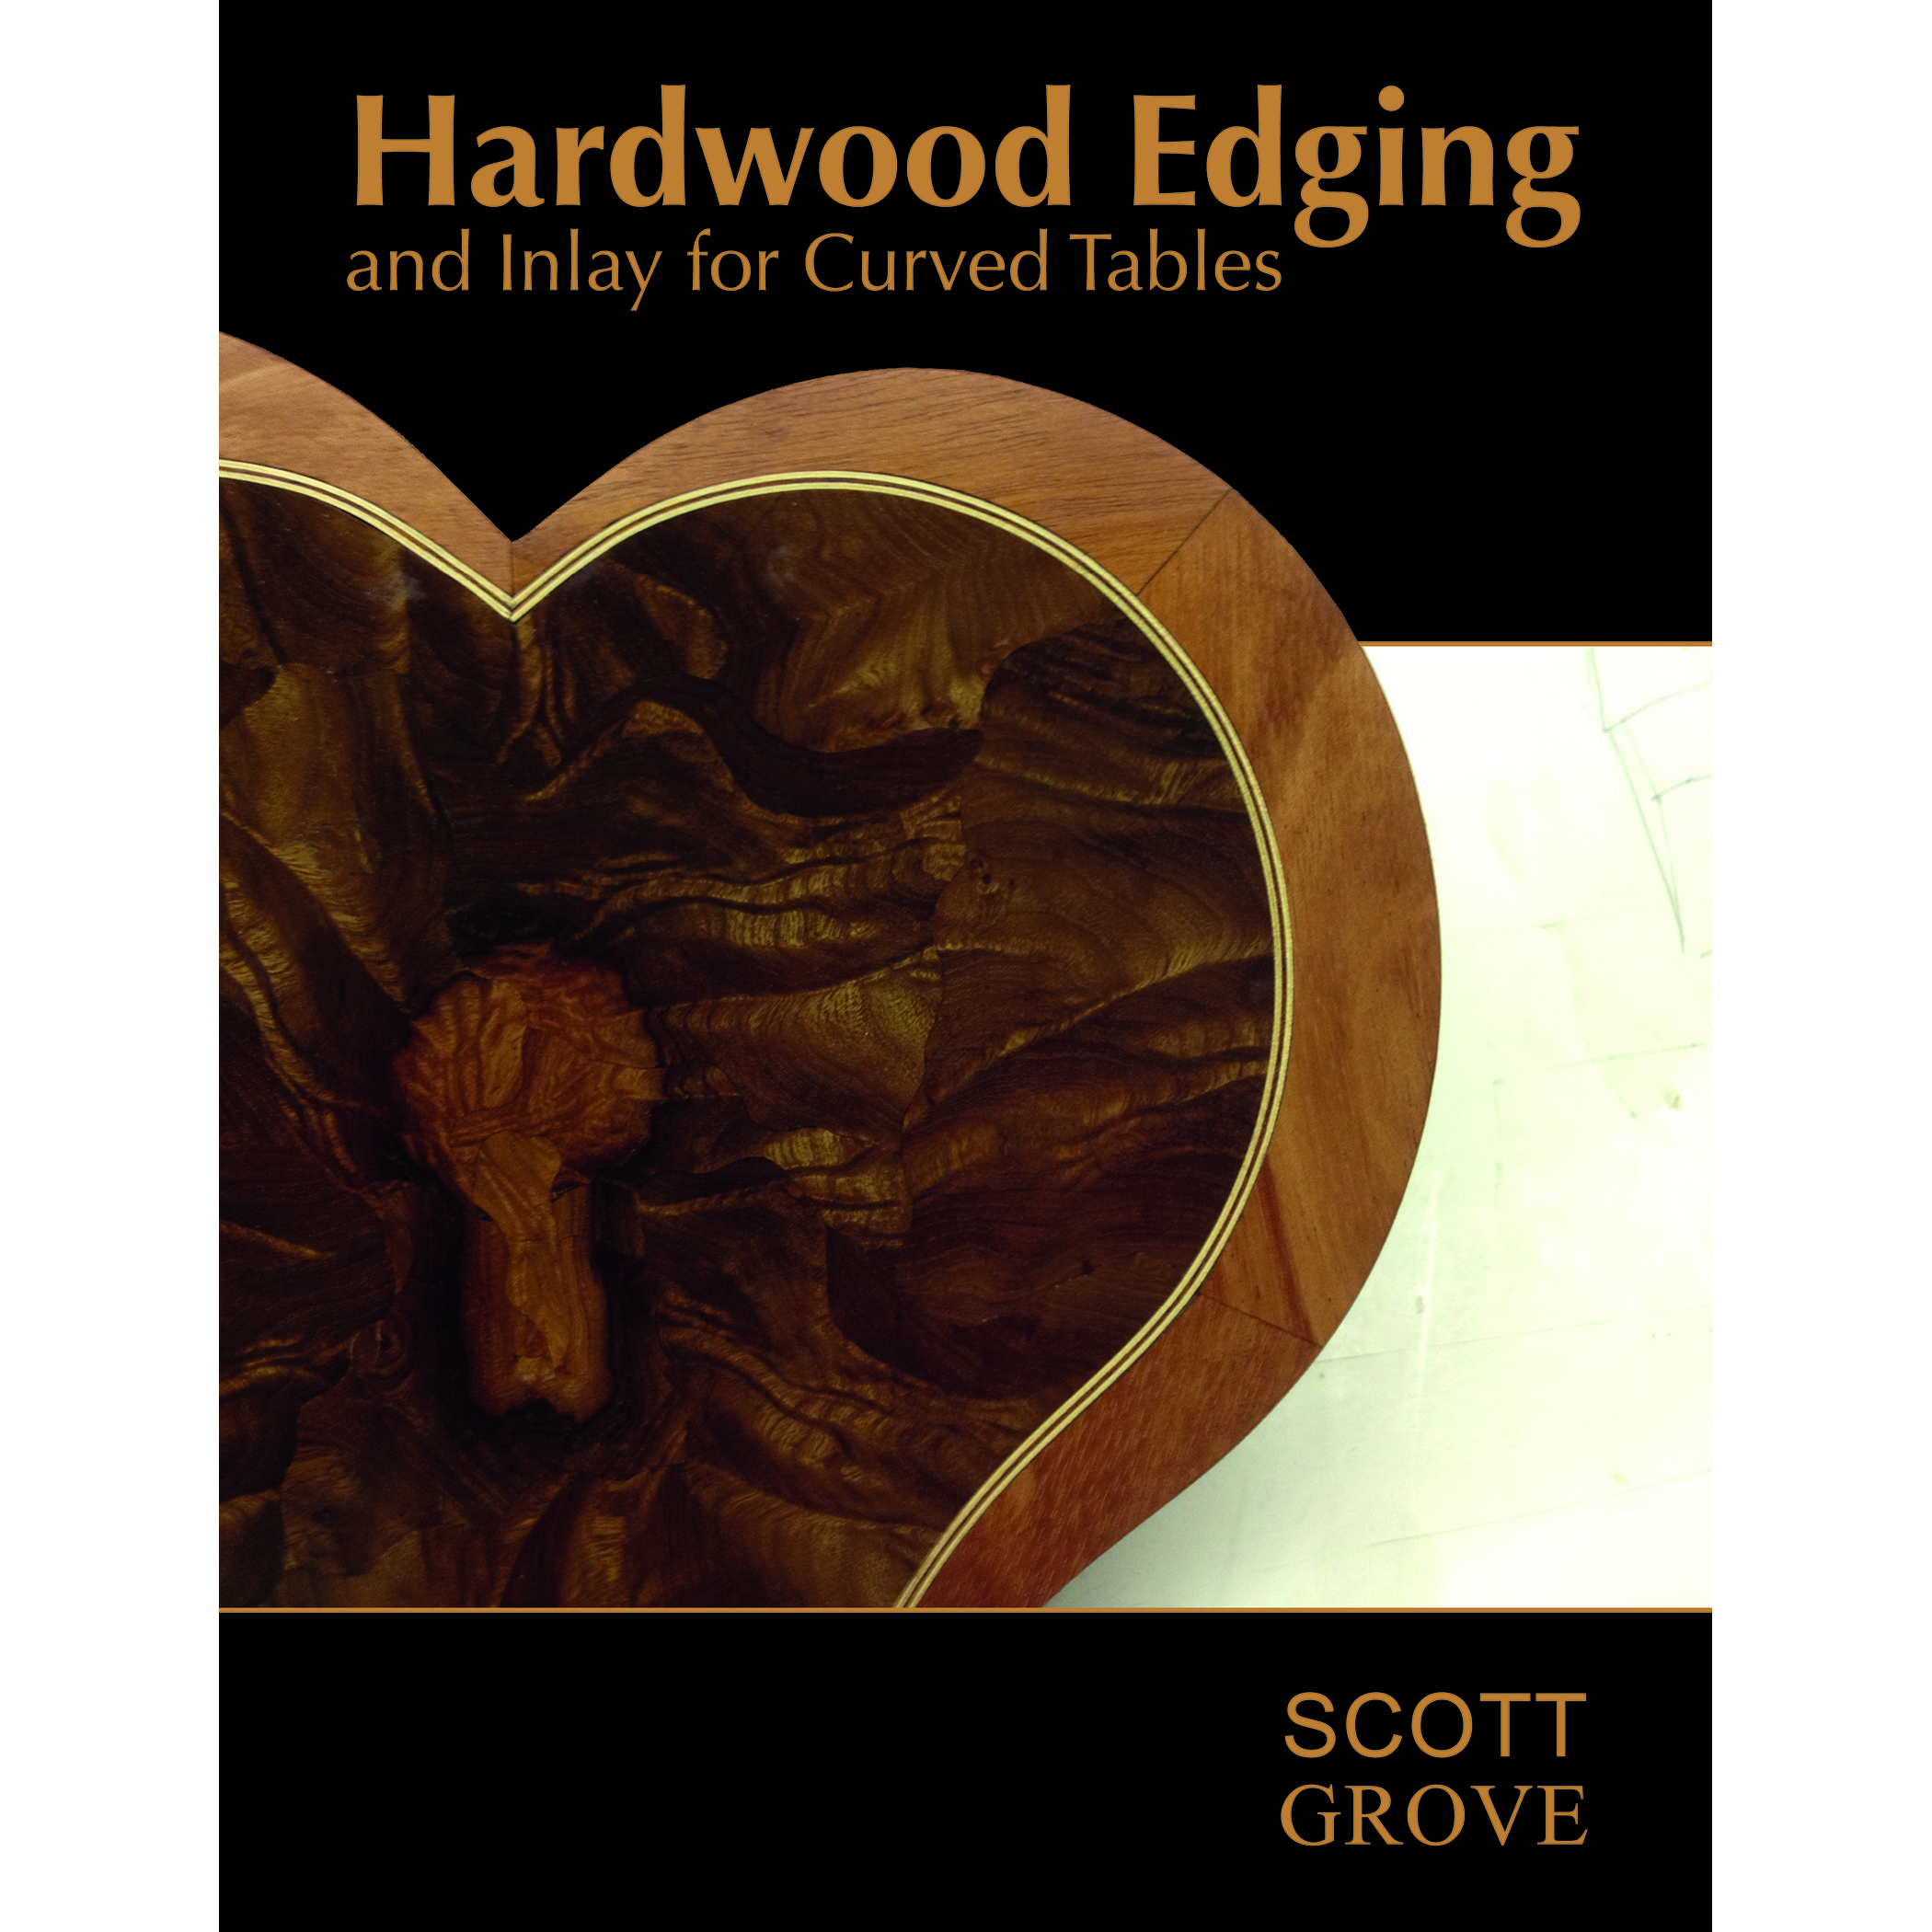 Hardwood Edging And Inlay For Curved Tables